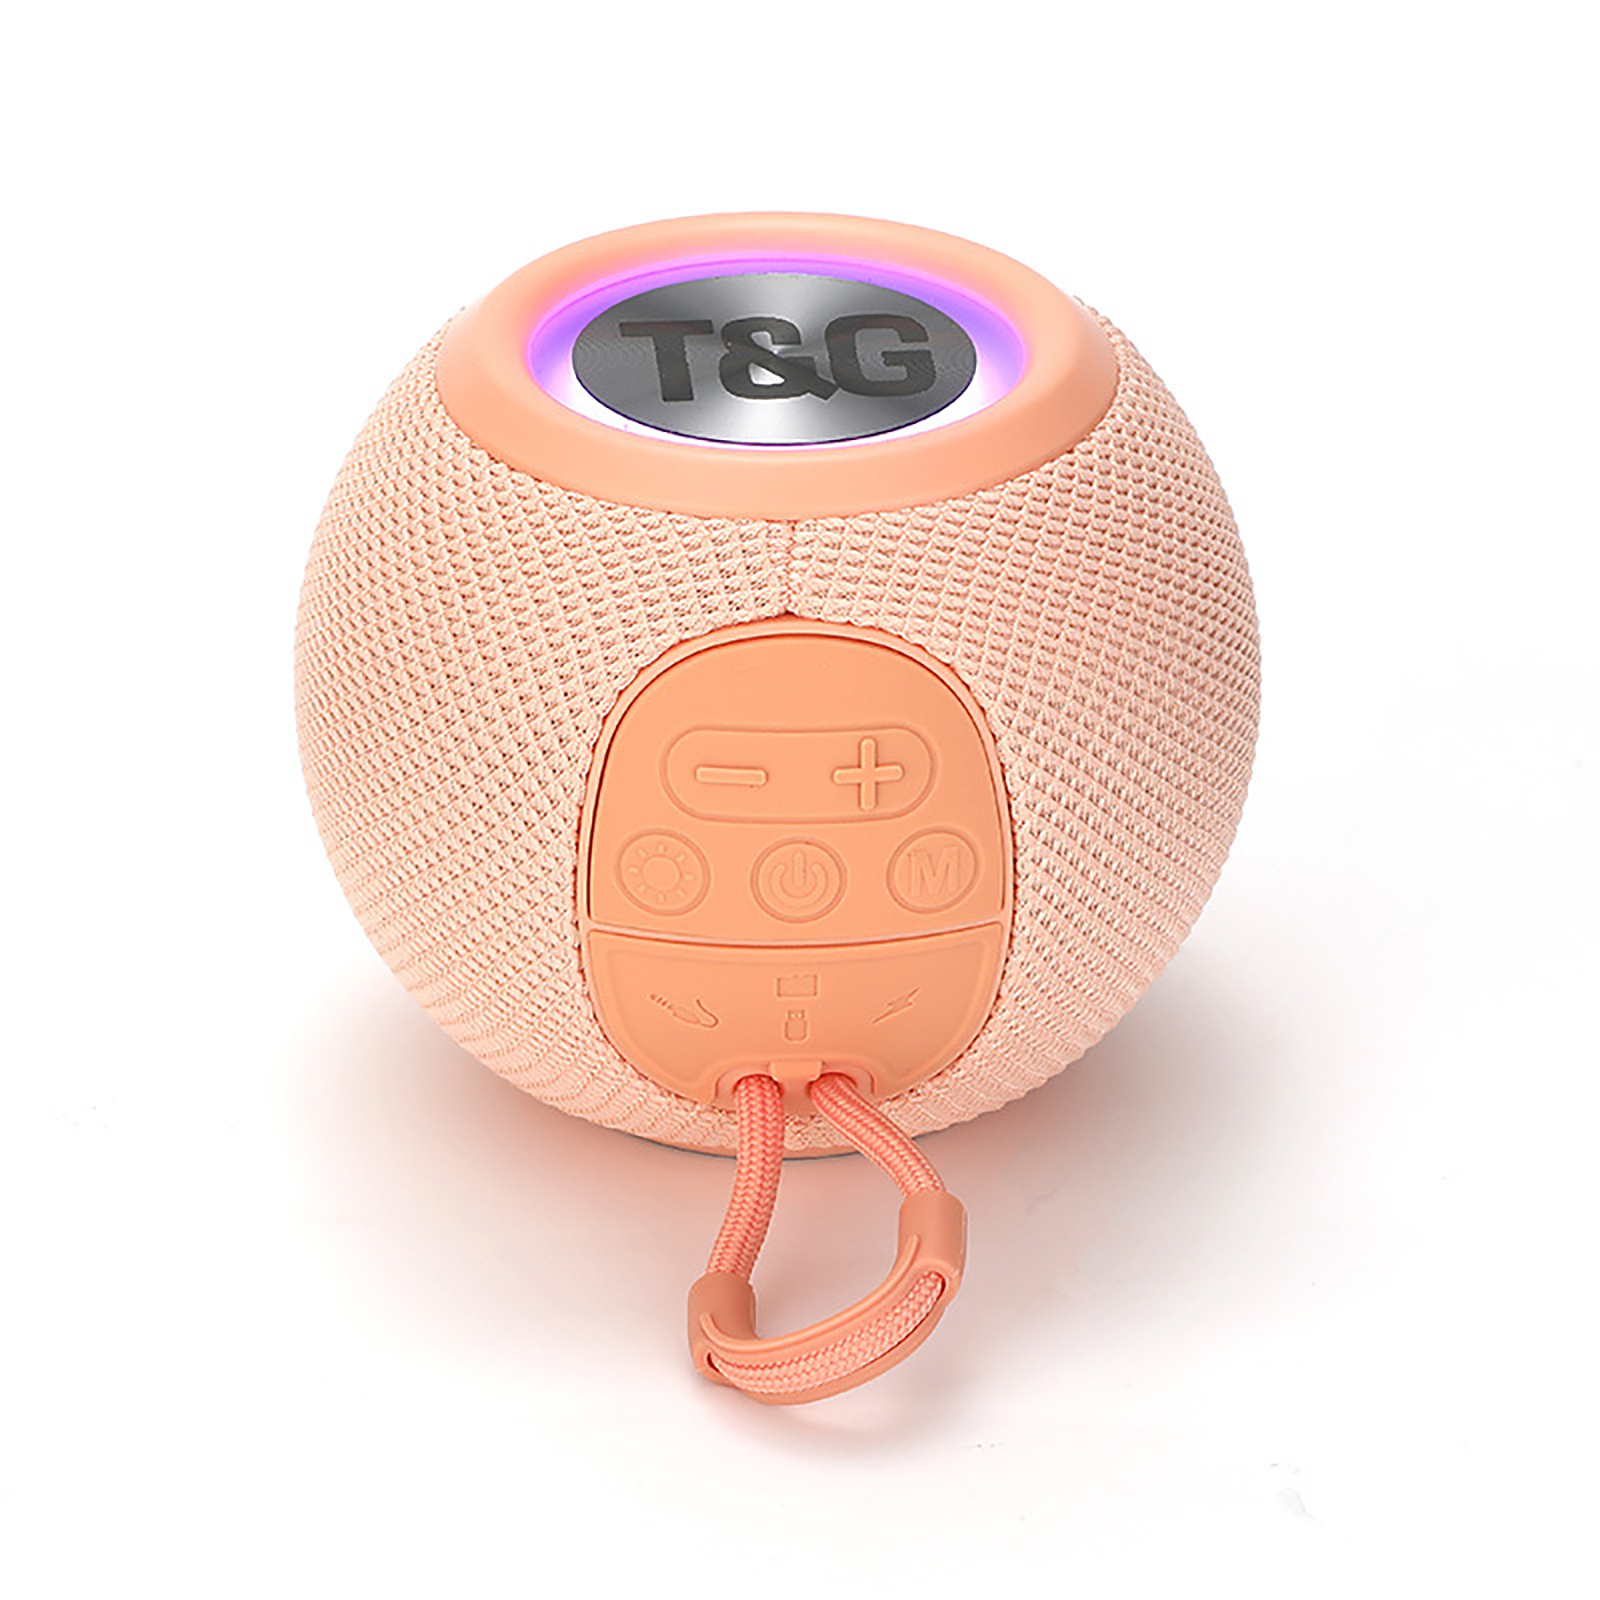 TG337 Wireless Speaker Portable Speaker Powerful Sound 57MM Horn Driver Speaker With Color Lights Micro SD USB AUX Player For Home Kitchen Outdoor Travelling